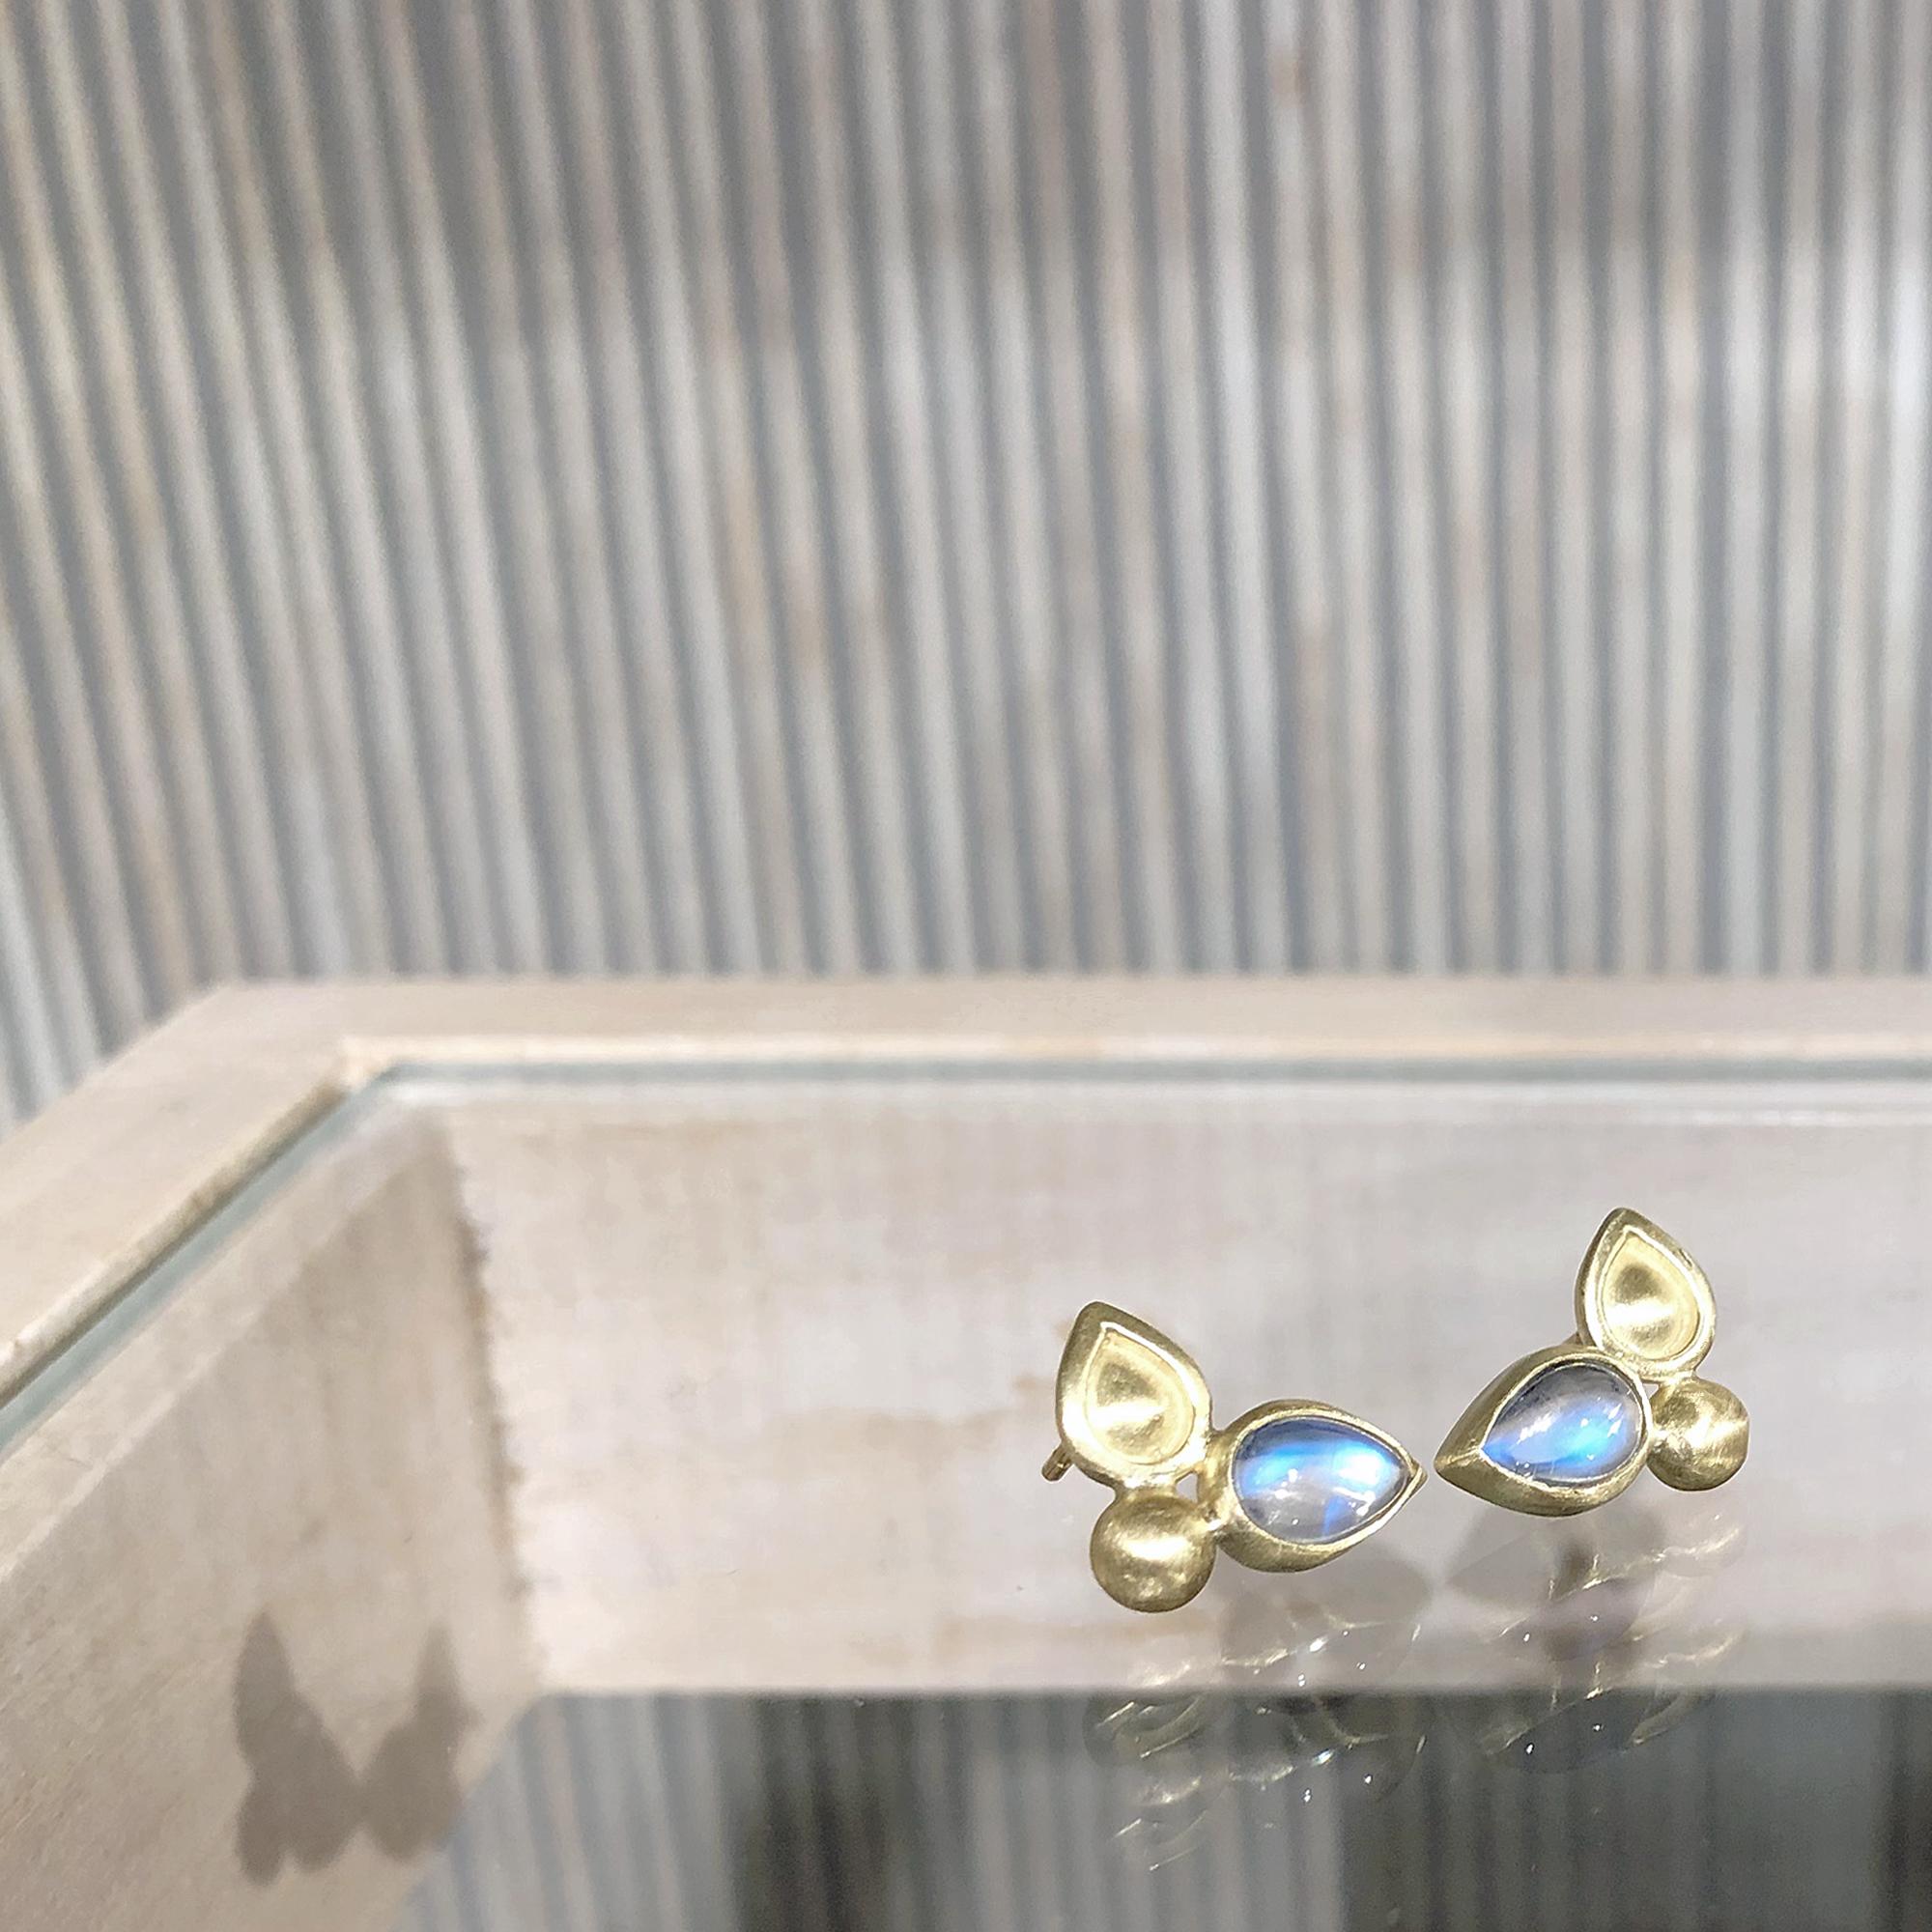 Double Shield Stud Earrings handcrafted by jewelry designer Monica Marcella featuring a matched pair of pear-shaped blue moonstones bezel-set in matte-finished 18k yellow gold with 18k gold posts. 